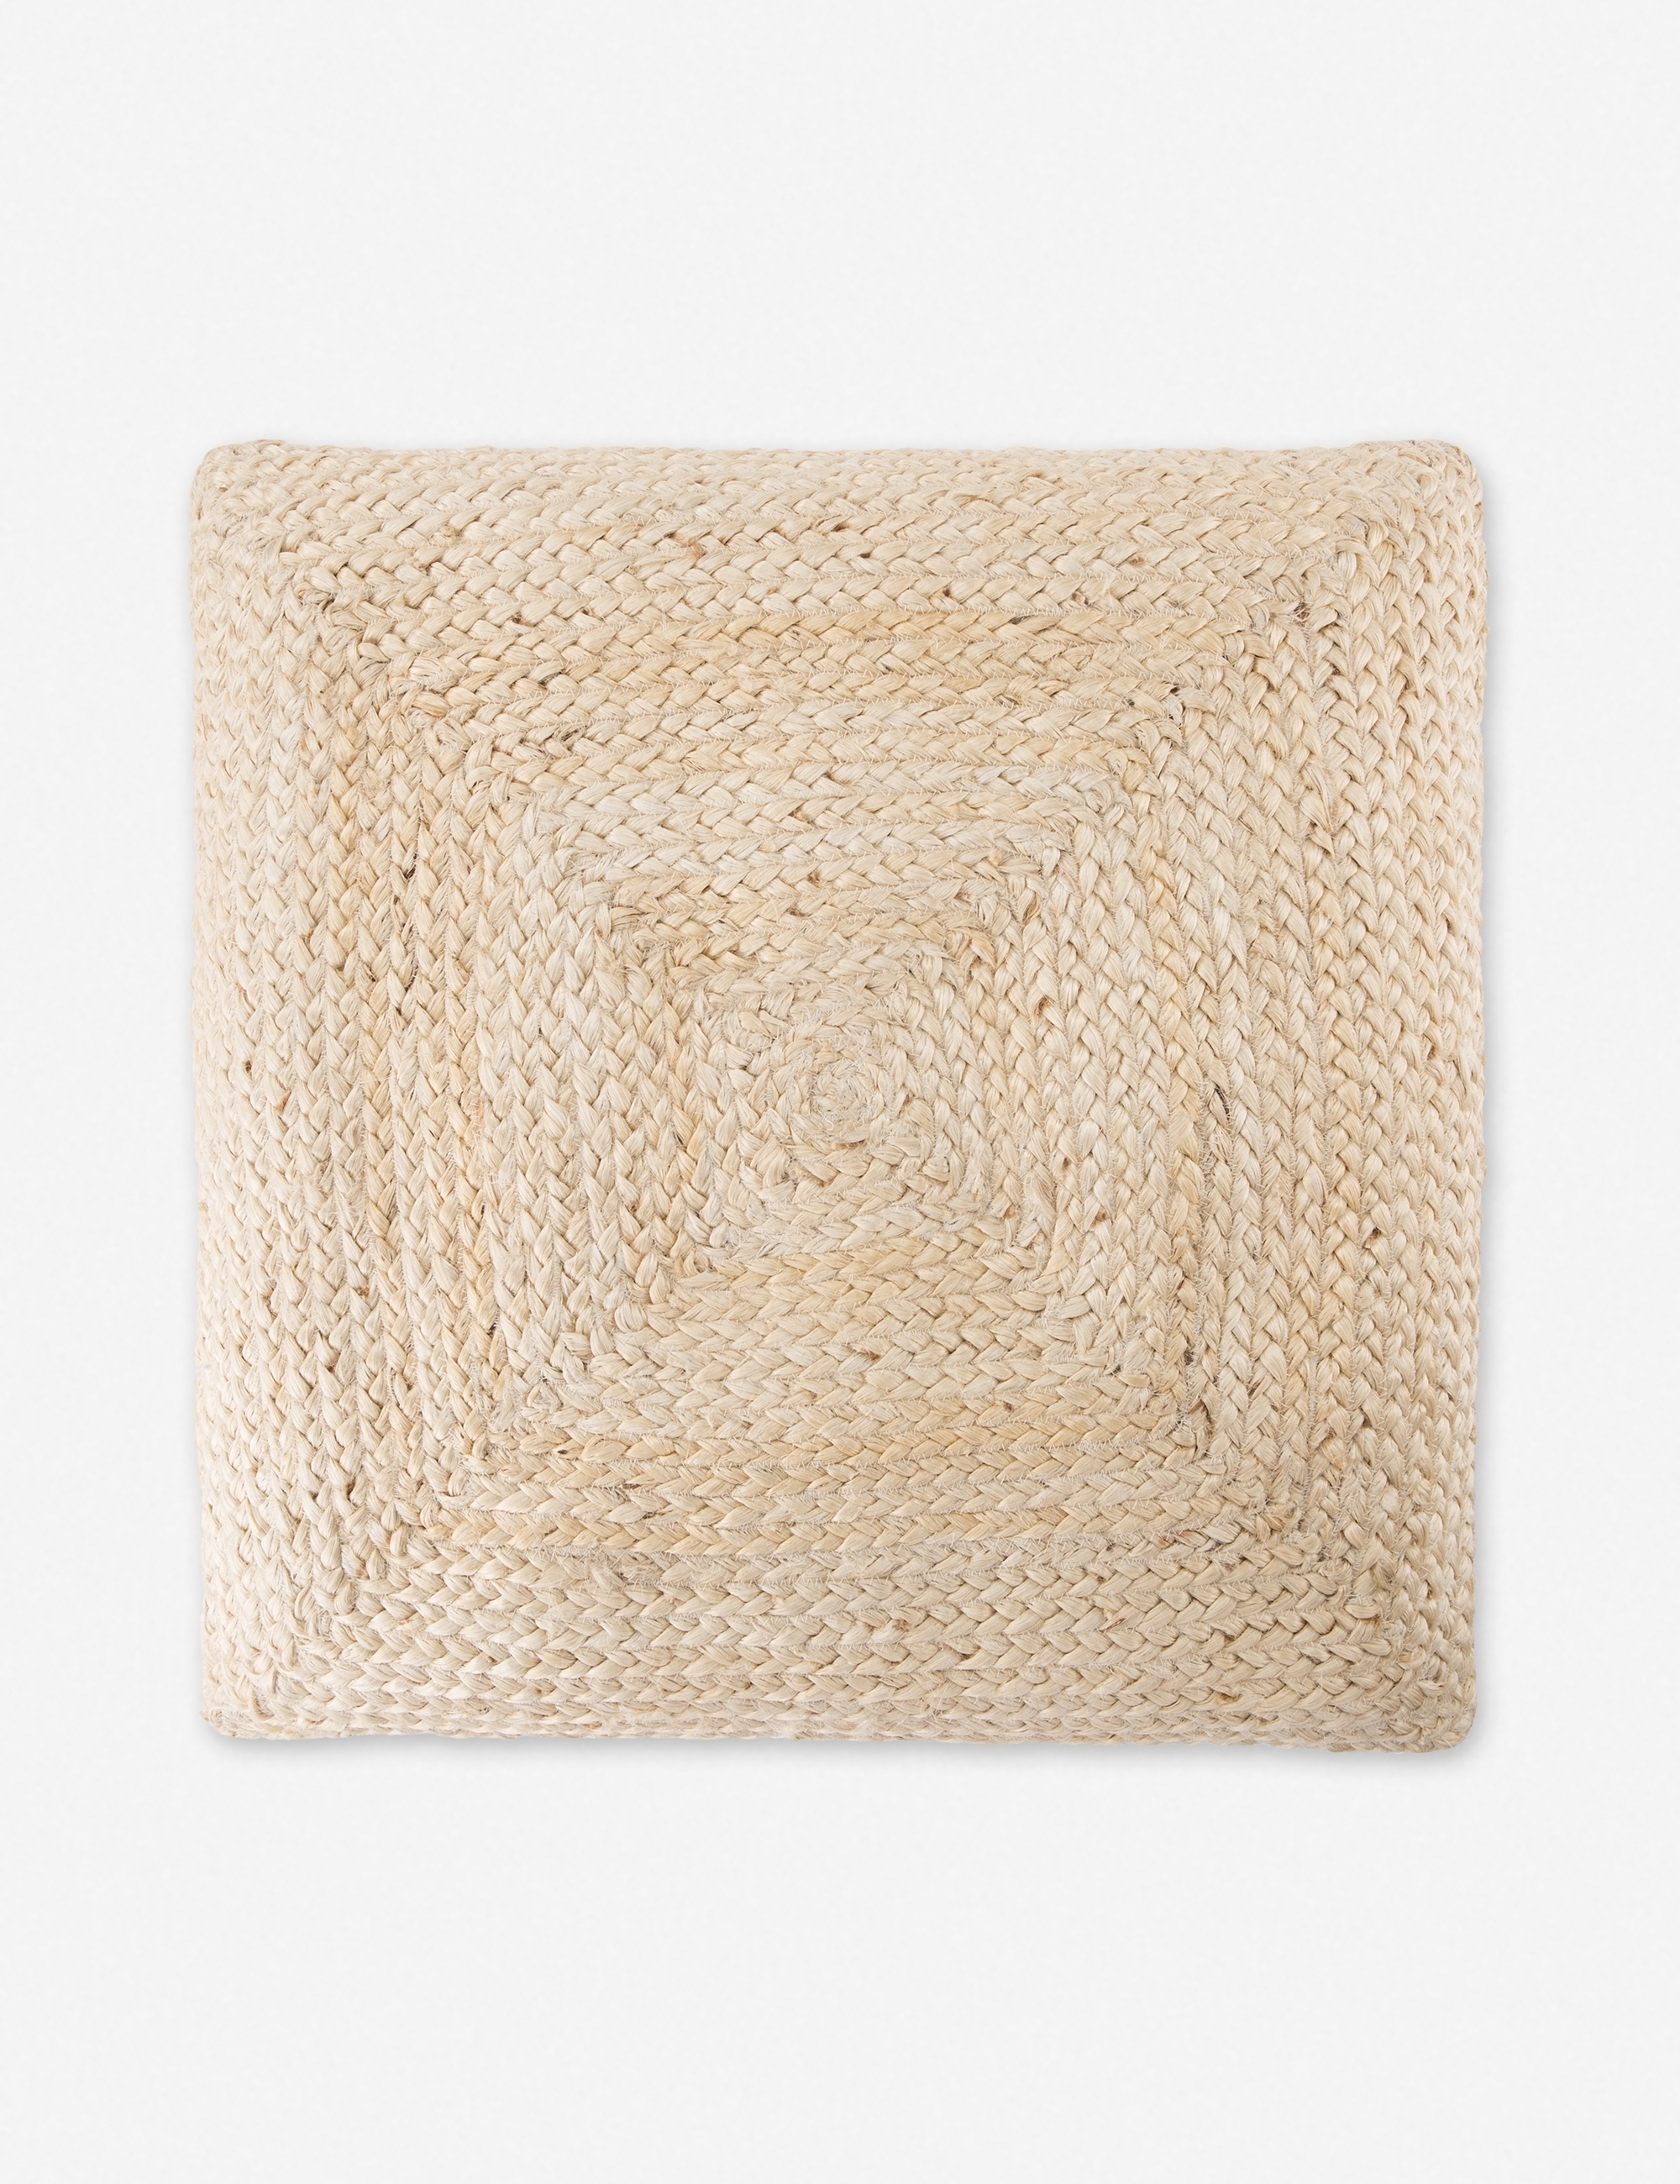 Candess Floor Pillow - Image 1